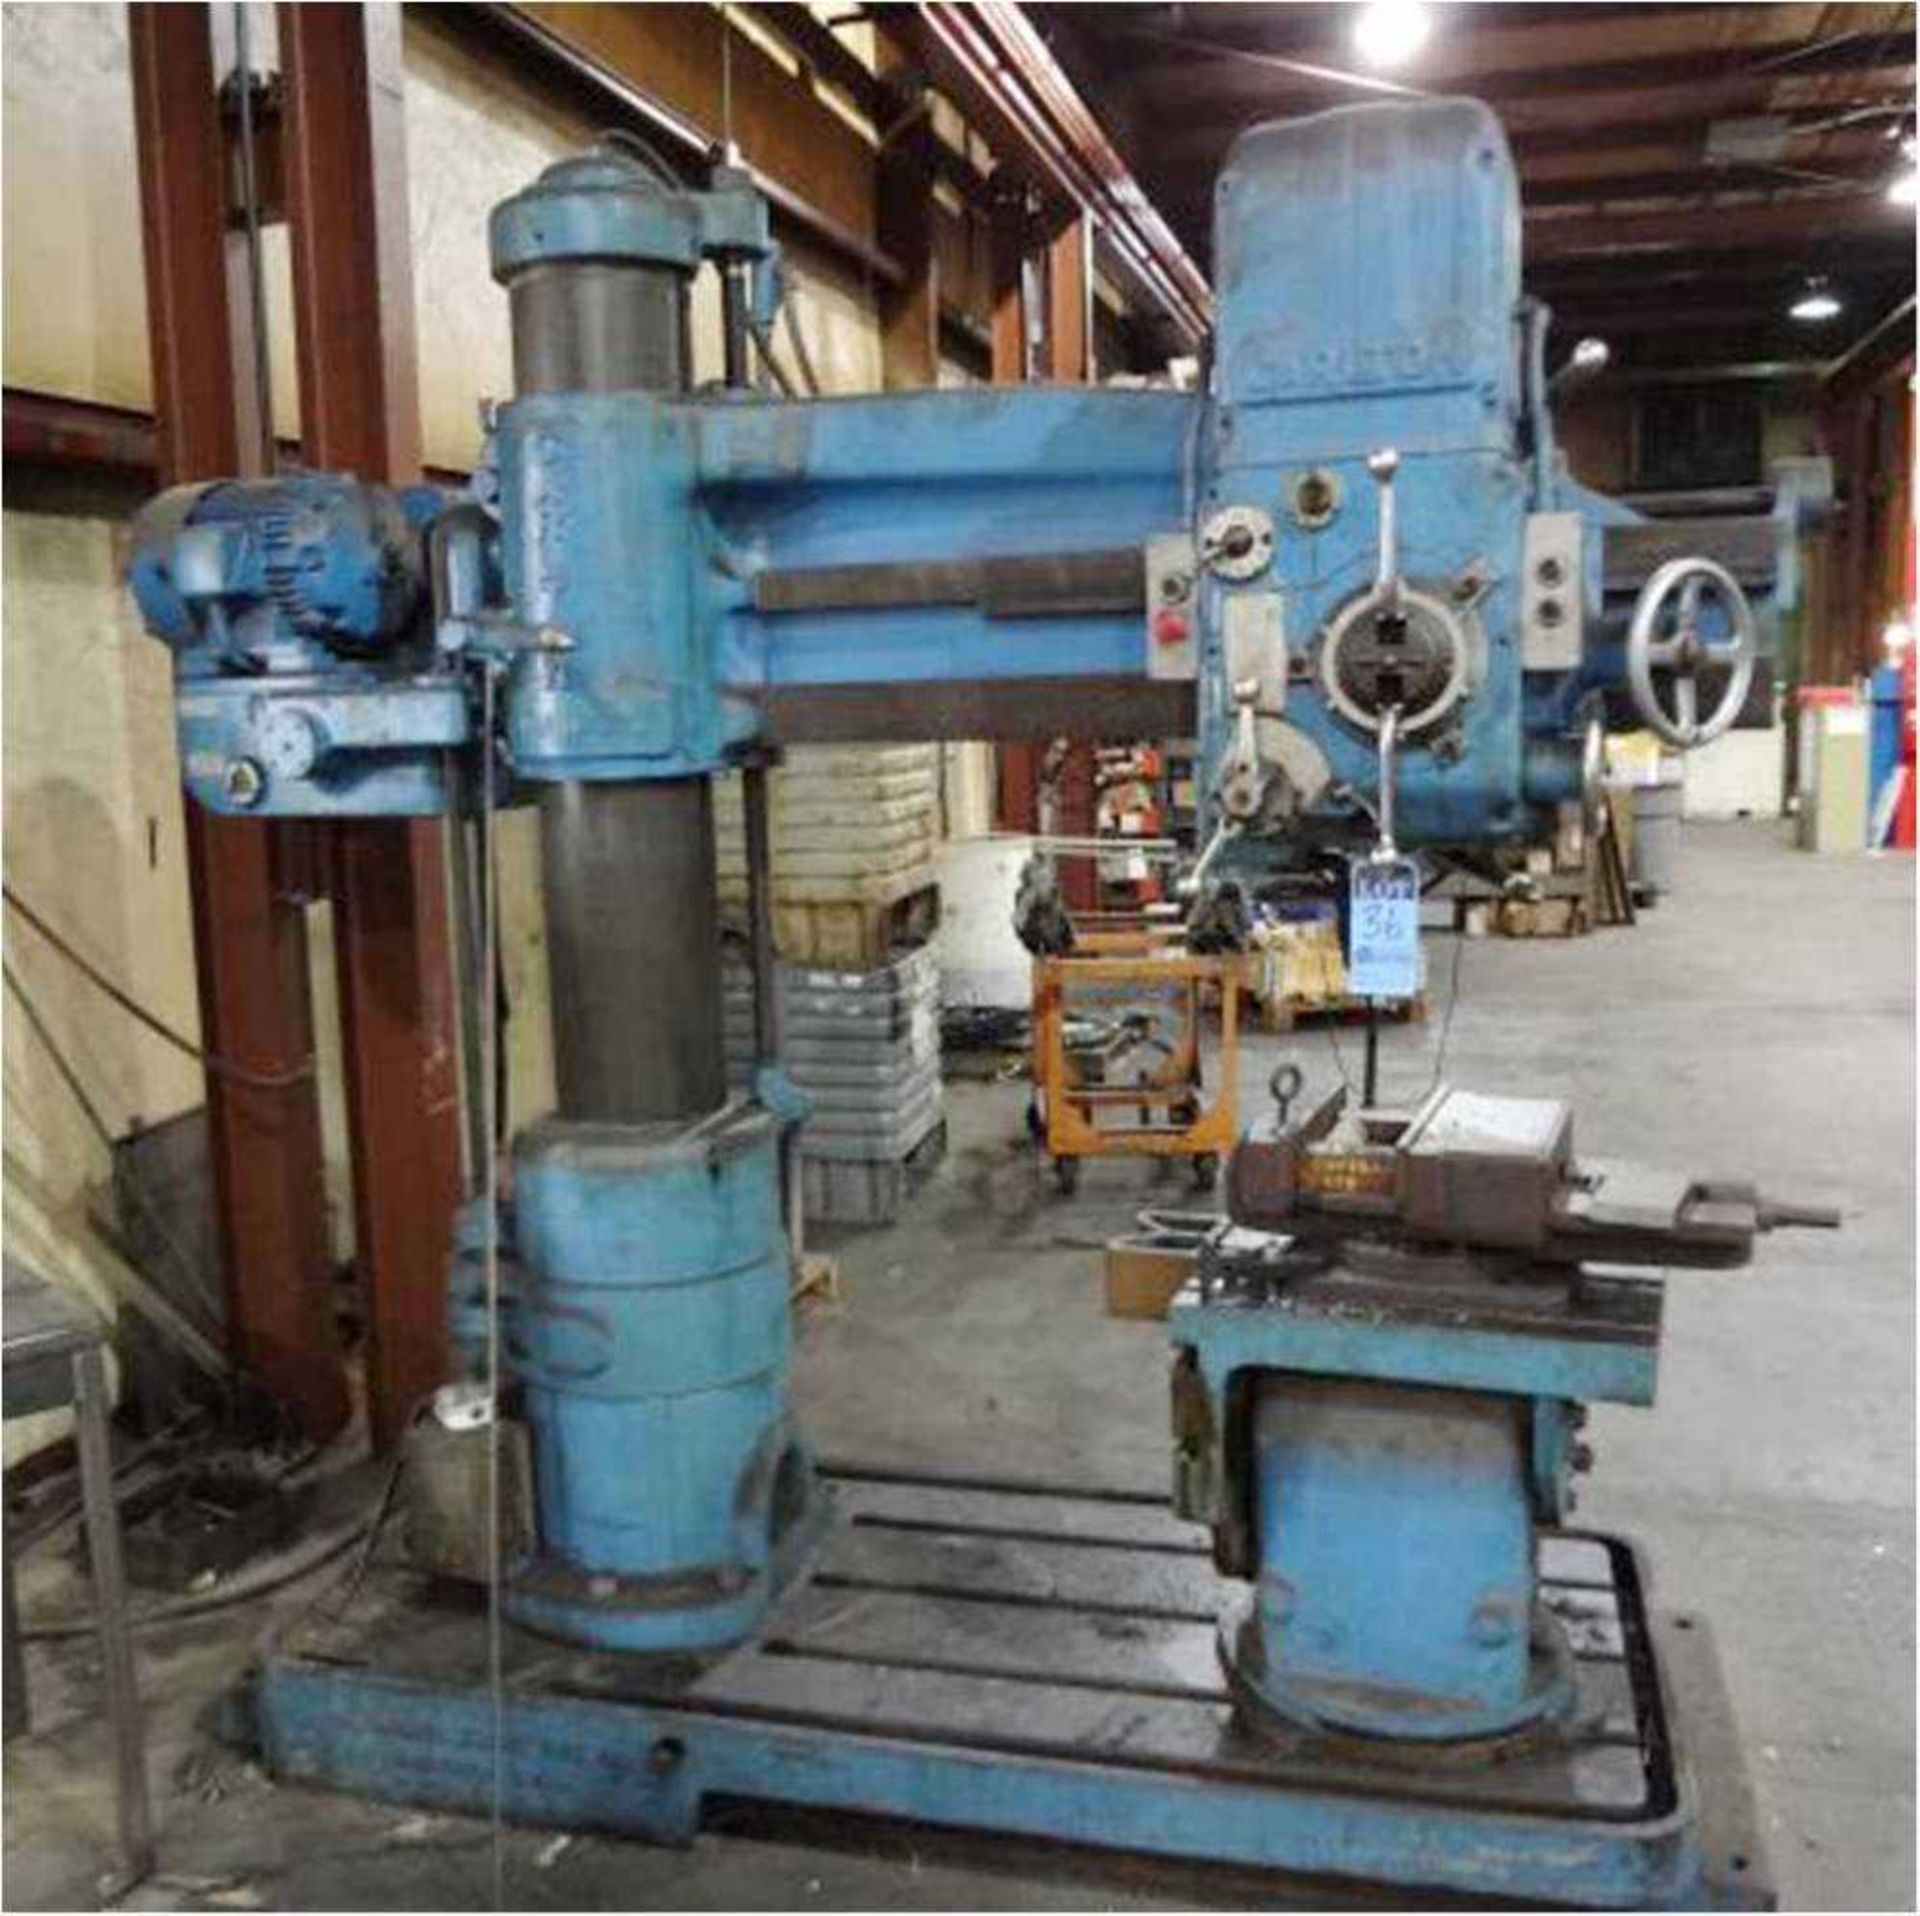 Carlton Radial Arm Drill, 4' x 11", Mdl: 1A, S/N: 1A-3845 (6663P) (Located In Painesville, OH)